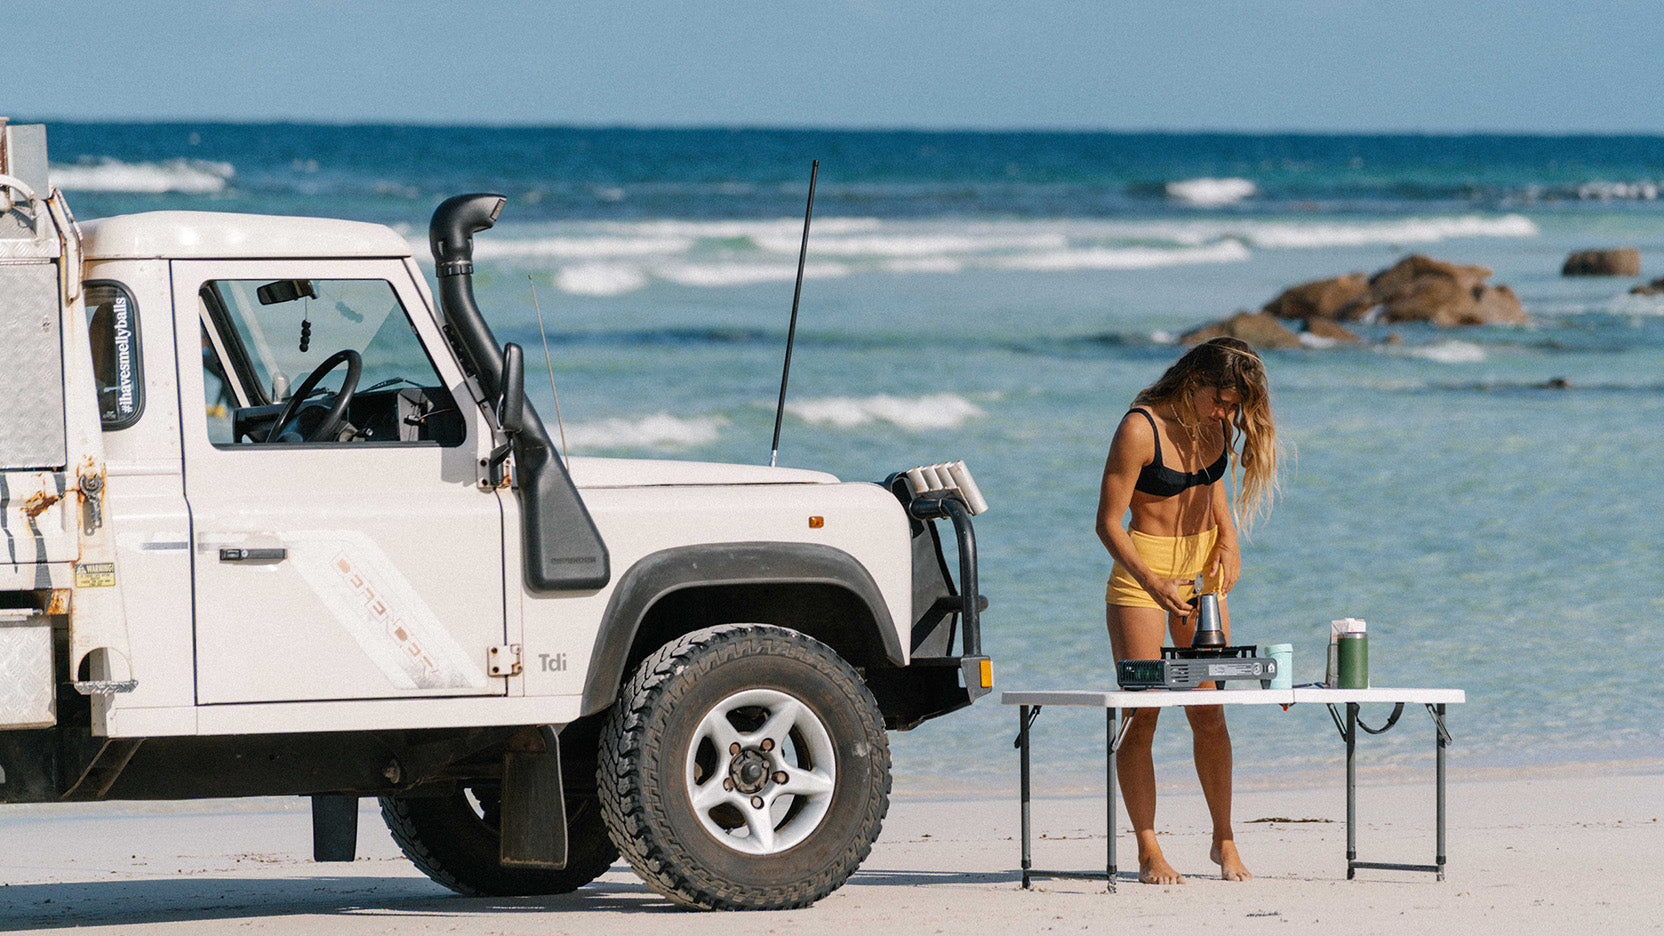 A landcruiser defender with a canopy and snorkel and Smelly Balls reusable air freshener on the rearview mirror on the beach with a woman in a swimsuit using a espresso maker to make a cup of coffee